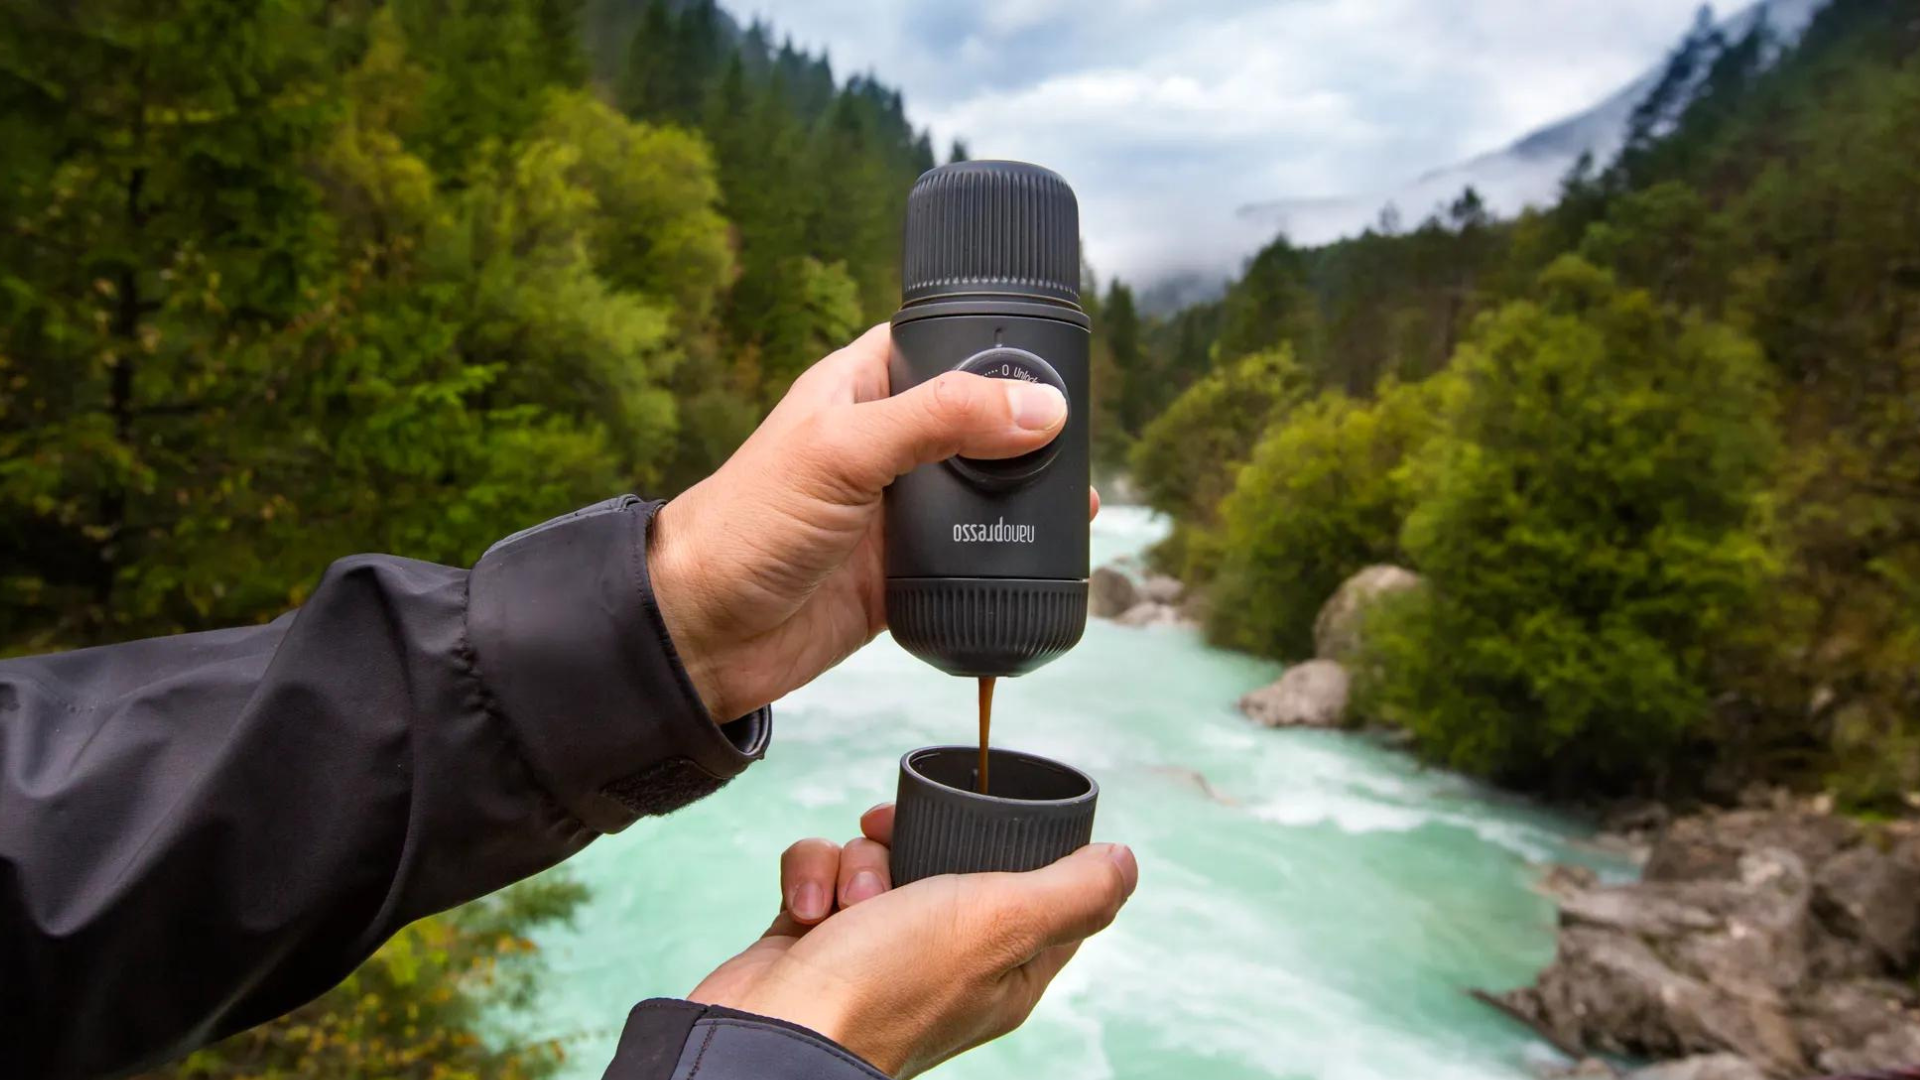 A man pouring coffee from a Nanopresso while in front of the river and trees